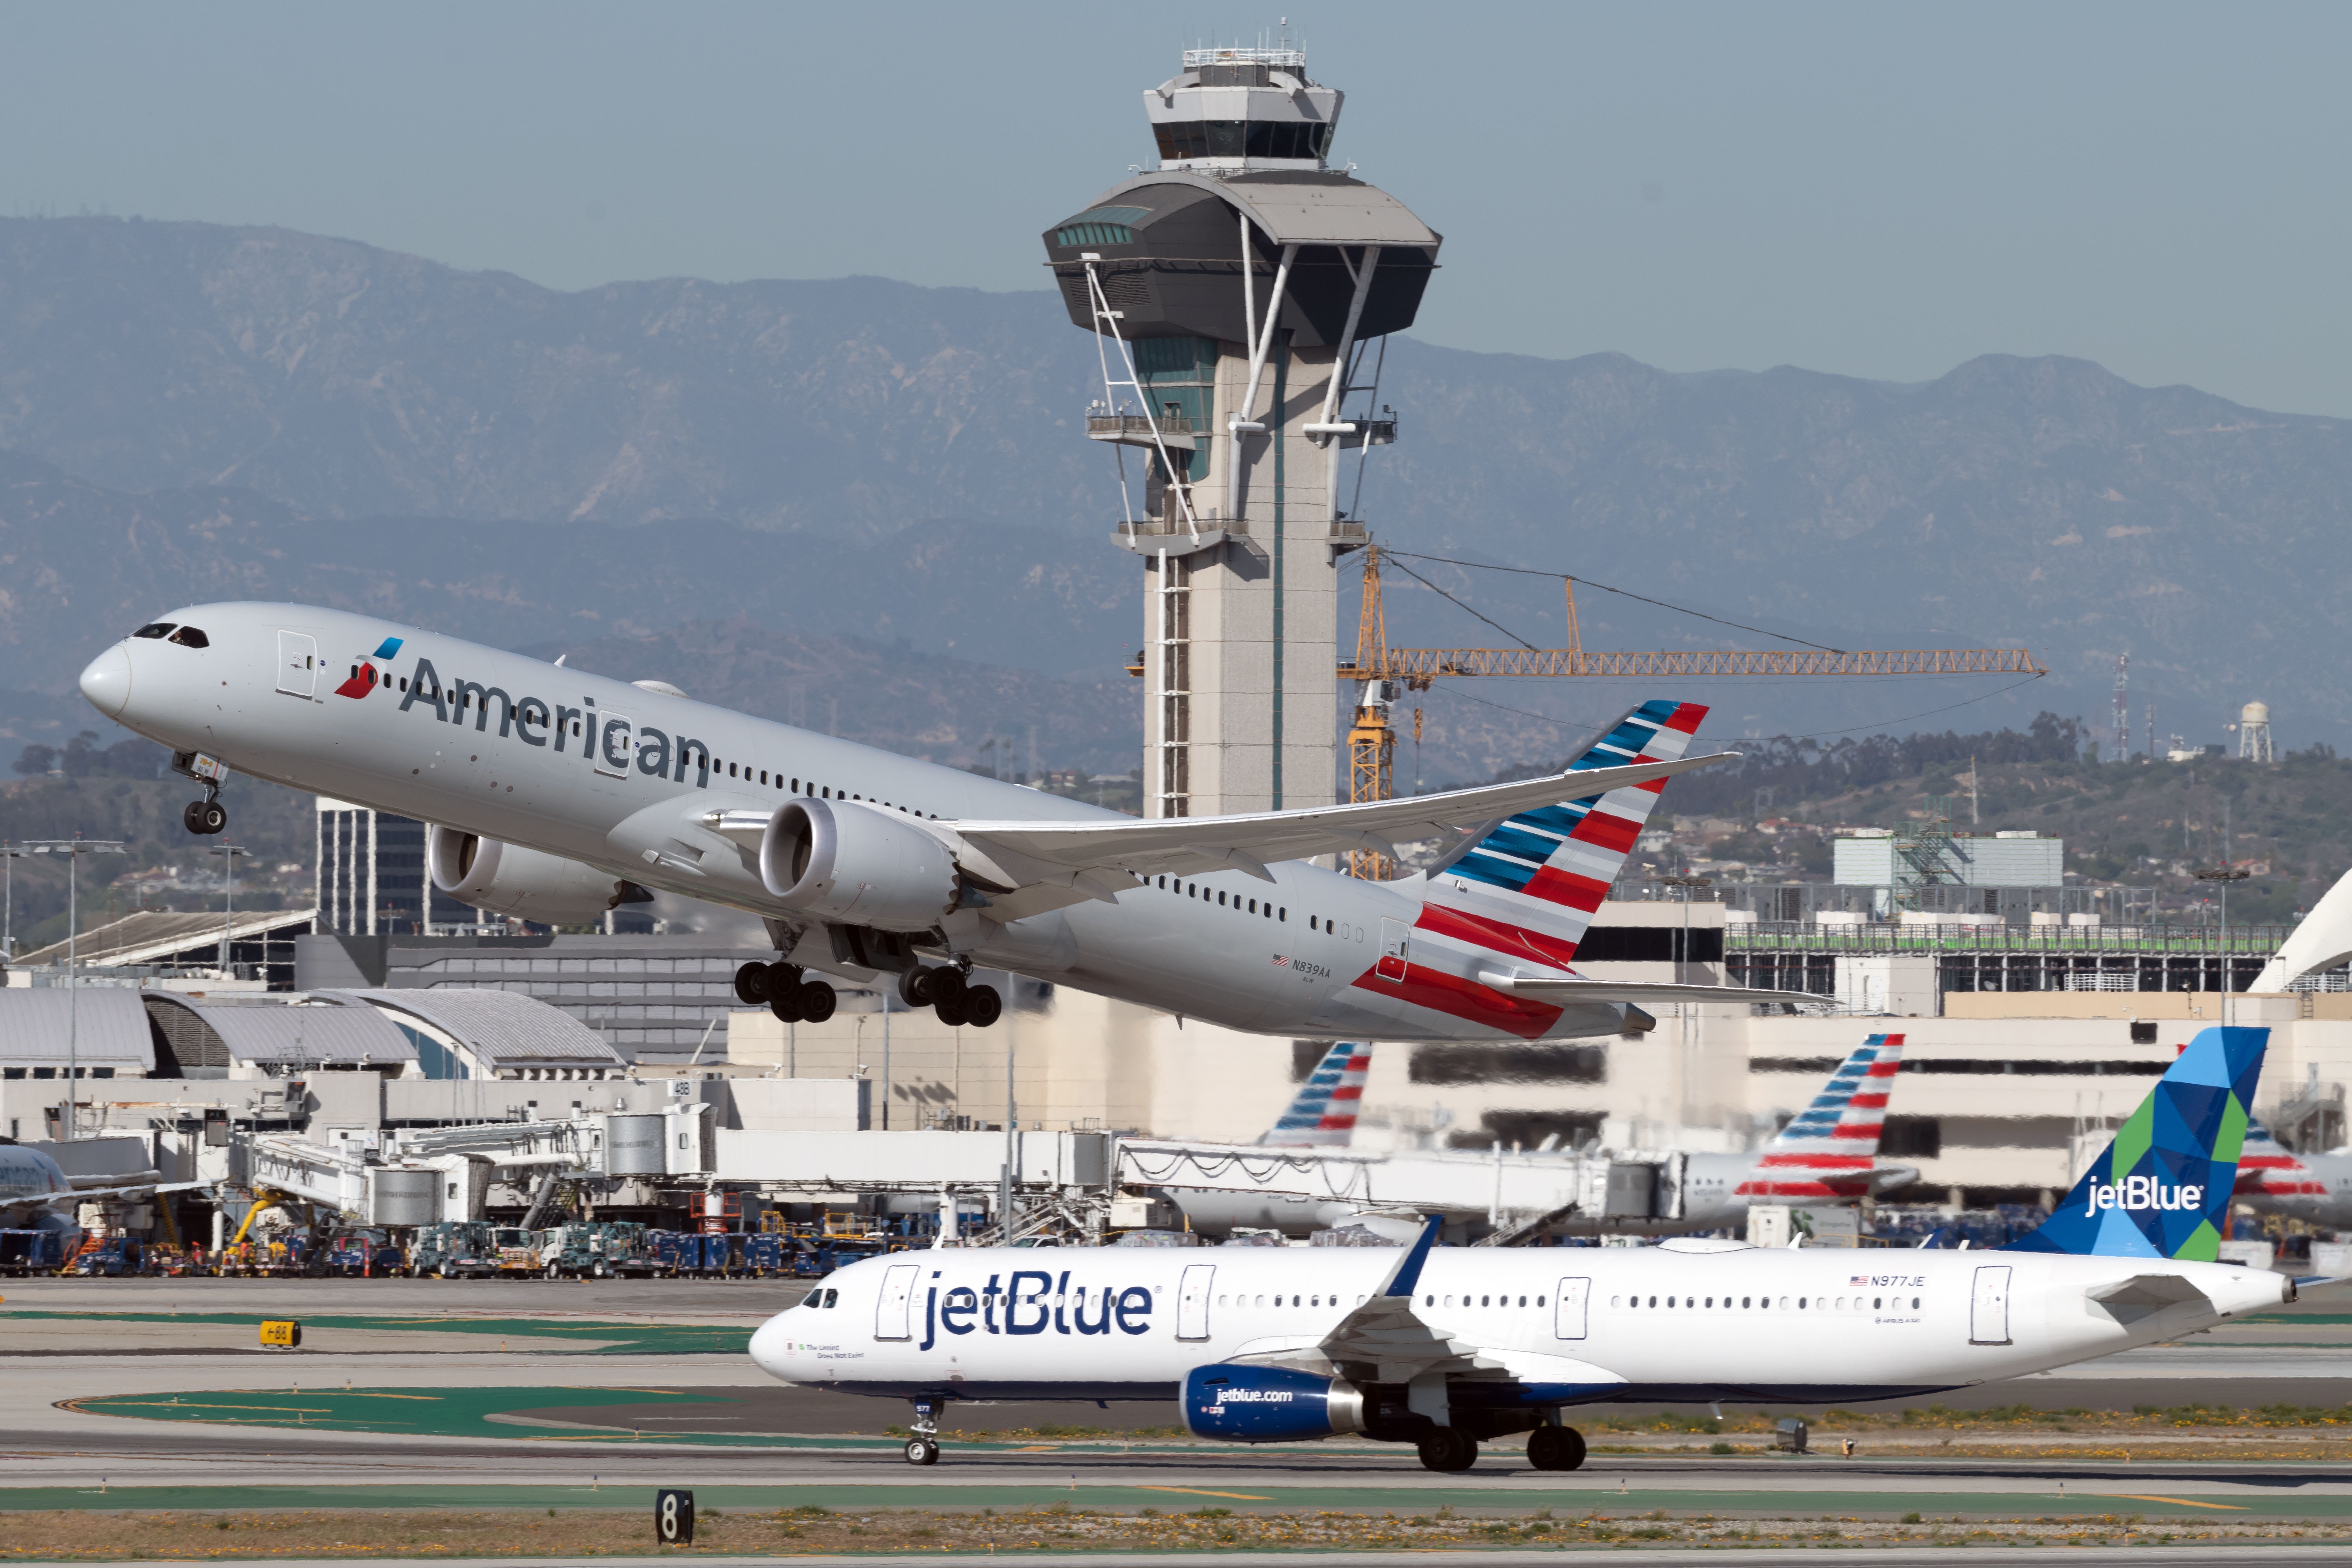 American airlines and jetblue at an airport